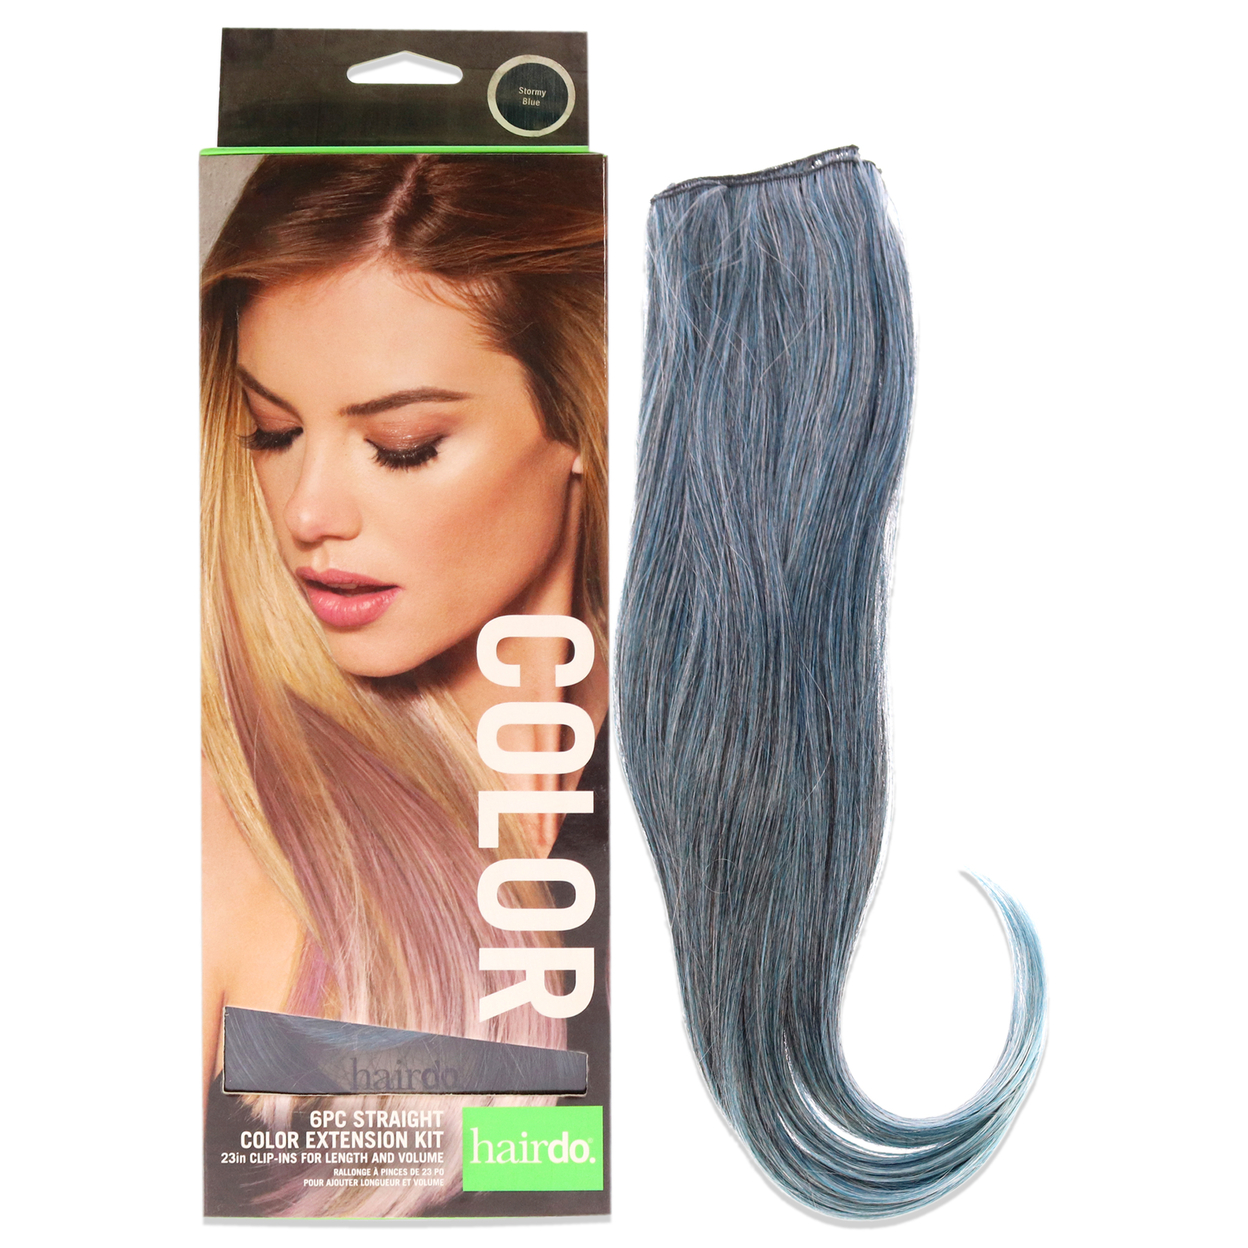 Hairdo Straight Color Extension Kit - Stormy Blue Hair Extension 6 X 23 Inch